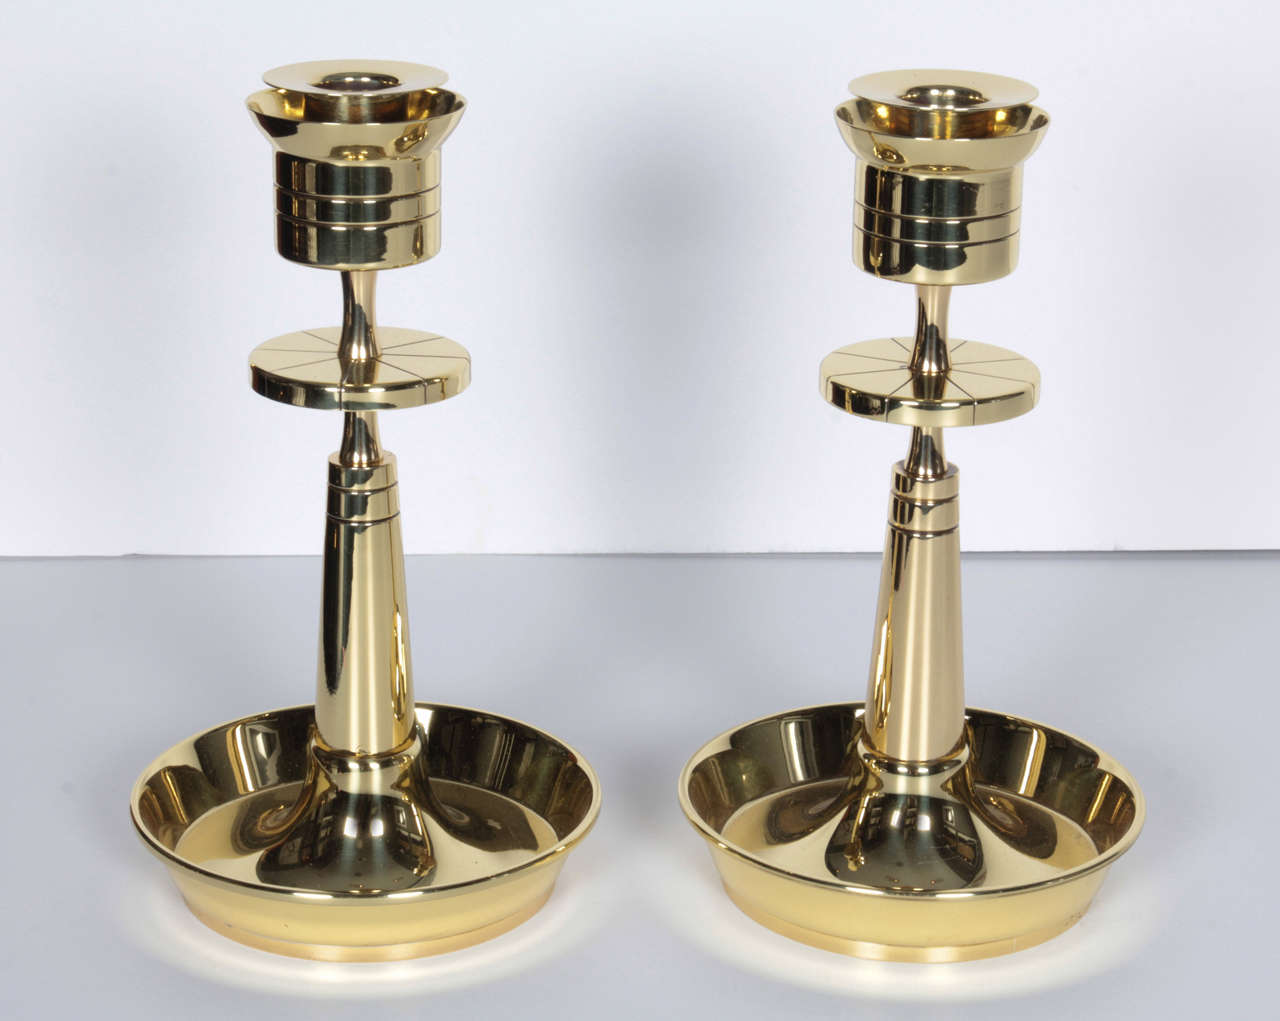 A stunning pair of brass candleholders by Tommi Parzinger for Dorlyn.